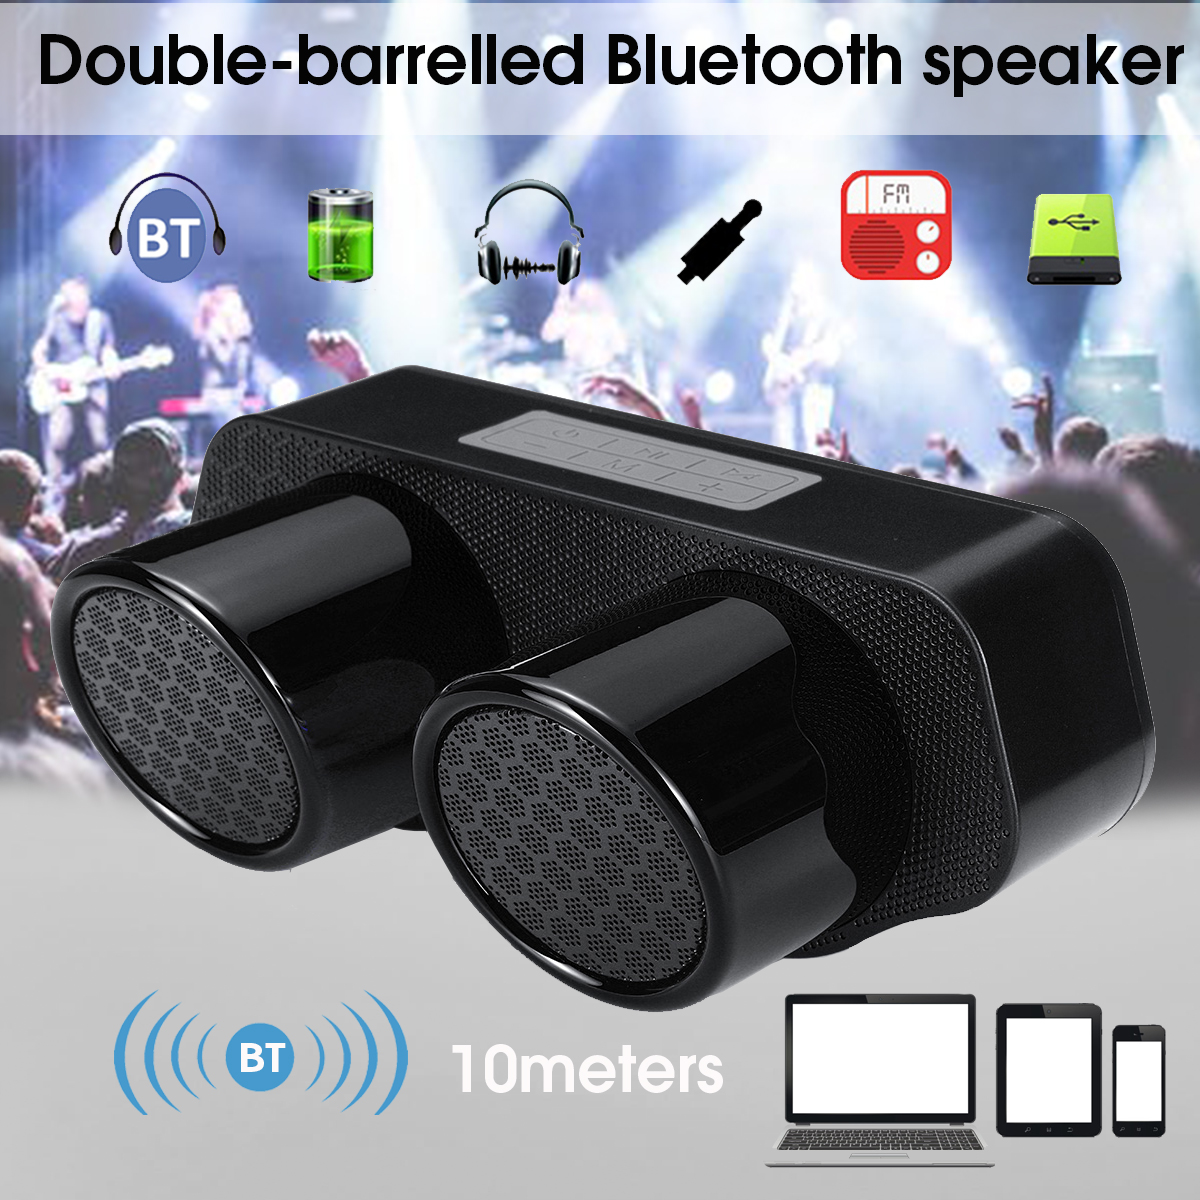 Rechargeable-Portable-Wireless-bluetooth-Speaker-FM-Radio-TF-Card-CSR50-Super-Bass-Sound-Stereo-Spea-1427727-4